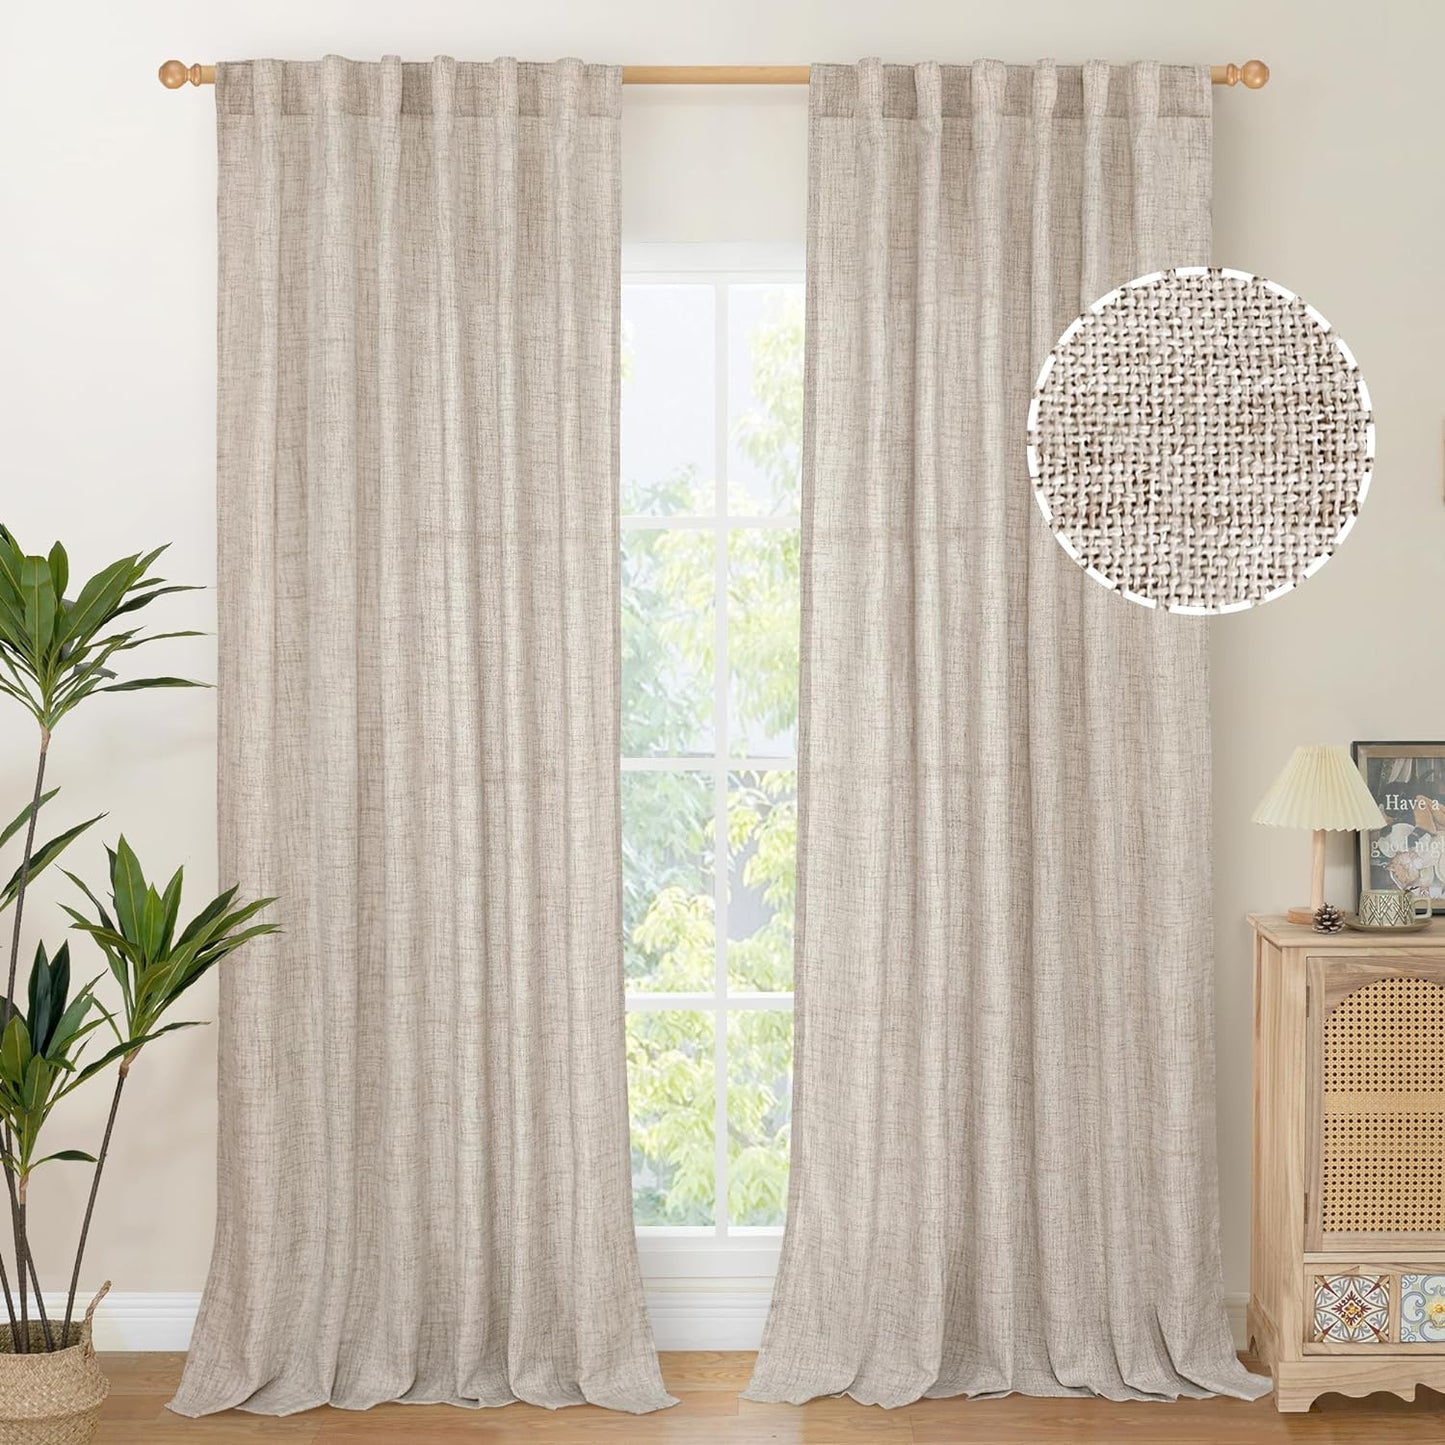 Youngstex Natural Linen Curtains 72 Inch Length 2 Panels for Living Room Light Filtering Textured Window Drapes for Bedroom Dining Office Back Tab Rod Pocket, 52 X 72 Inch  YoungsTex Natural 52W X 95L 